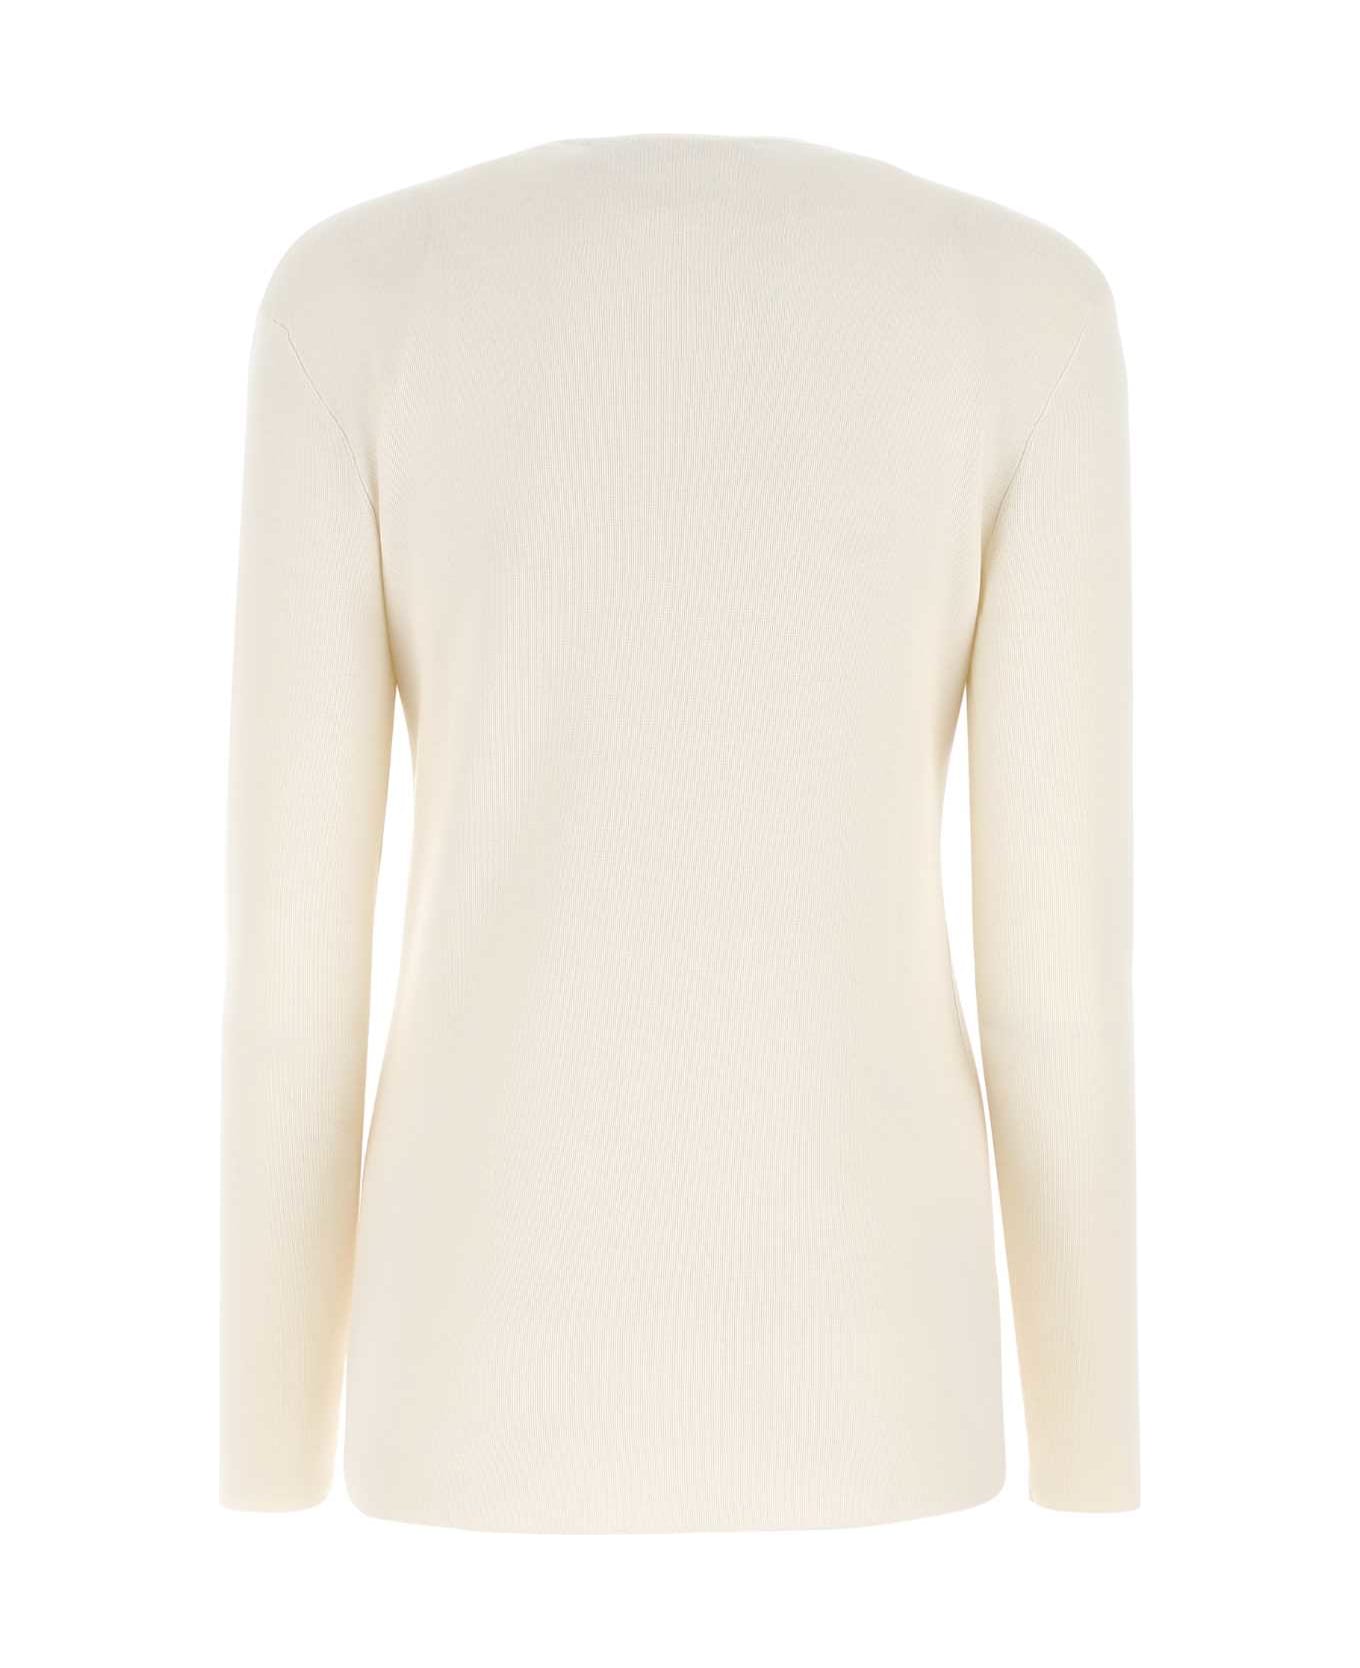 Gucci Ivory Cashmere Top - White